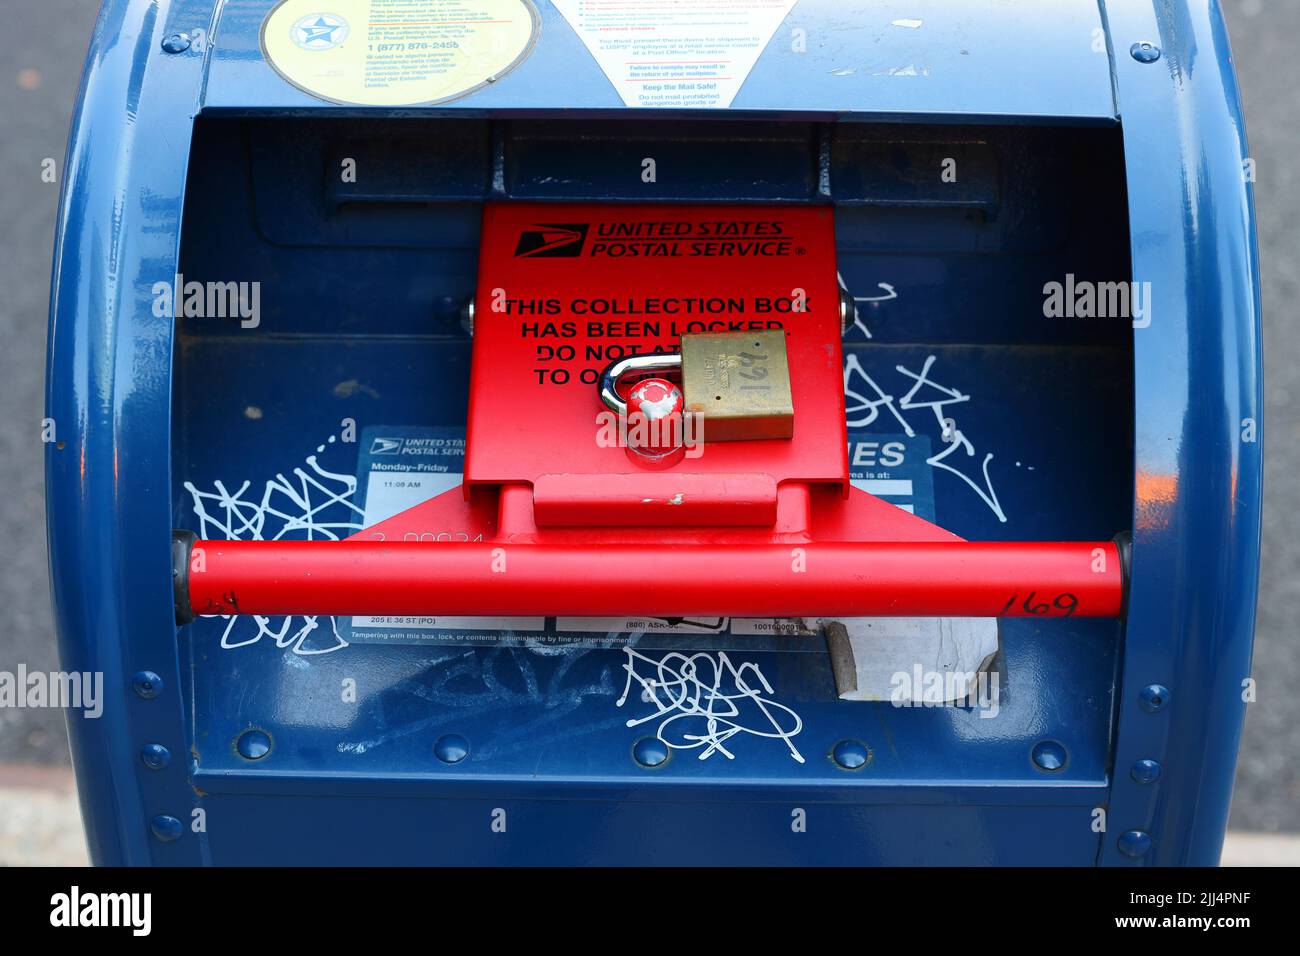 A USPS mailbox with a red security locking device. A locked collection mailbox in New York with mail not being collected at this location. Stock Photo